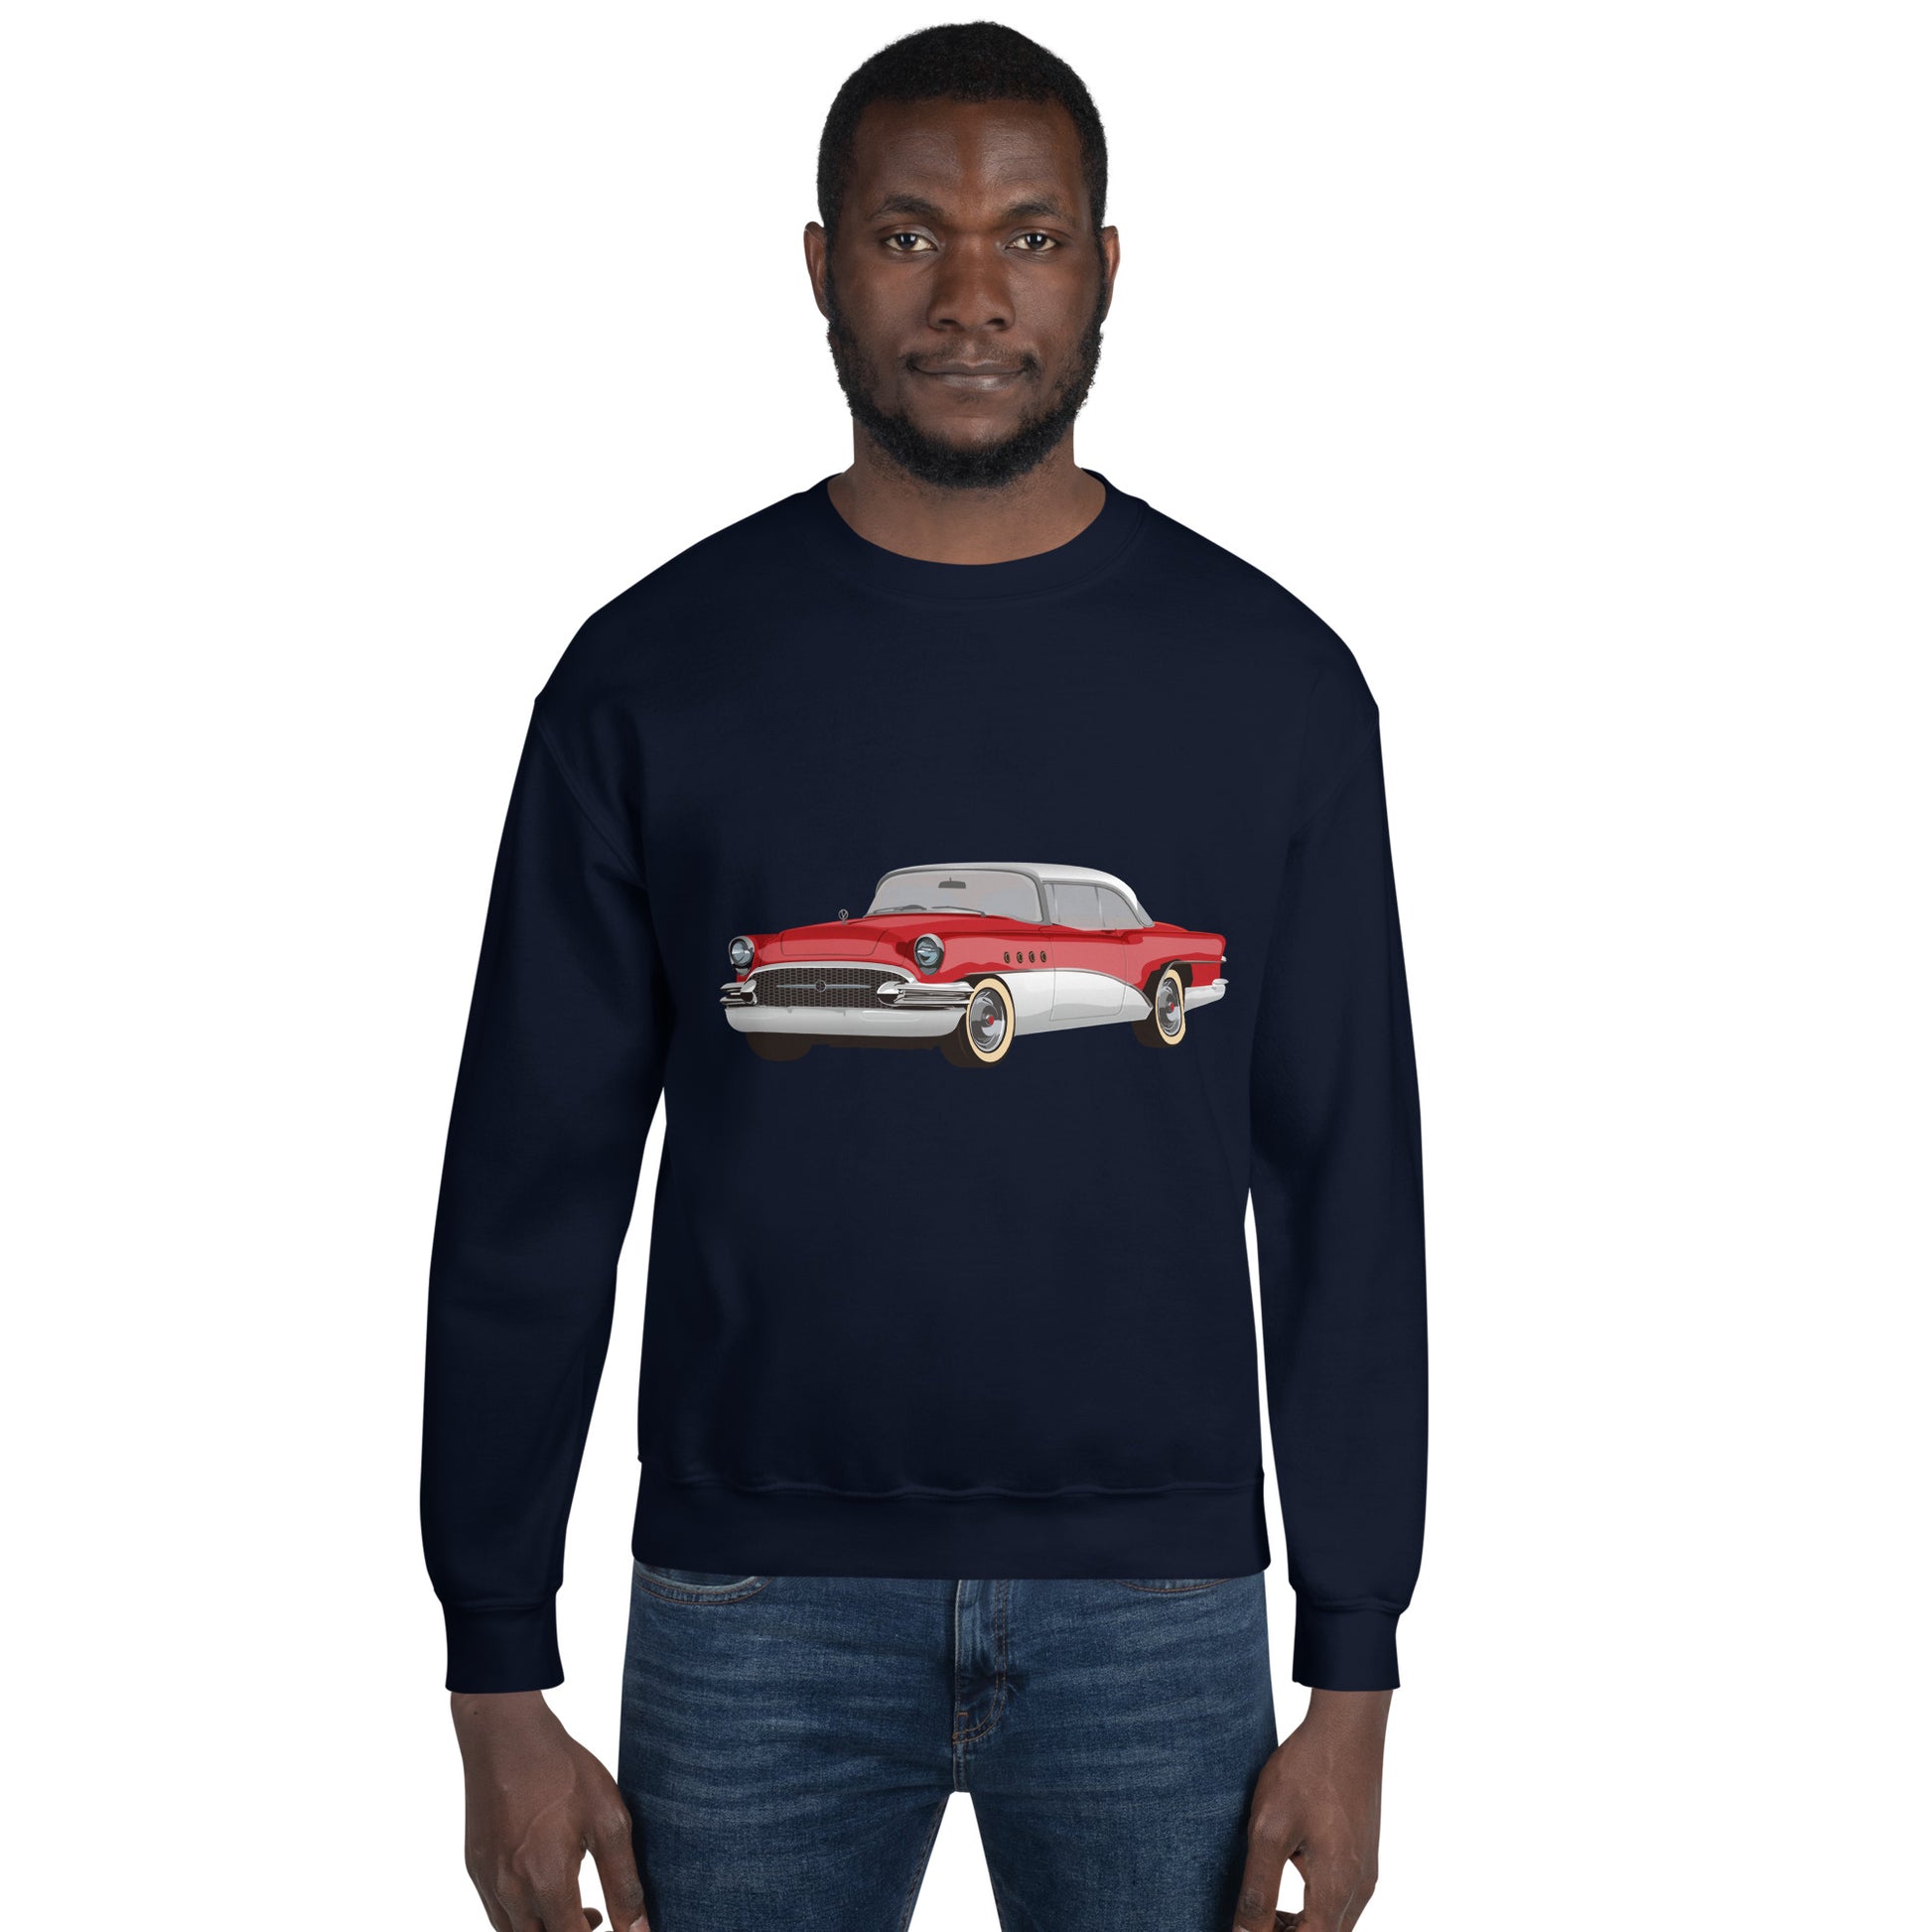 Man with navy sweatshirt with red chevrolet